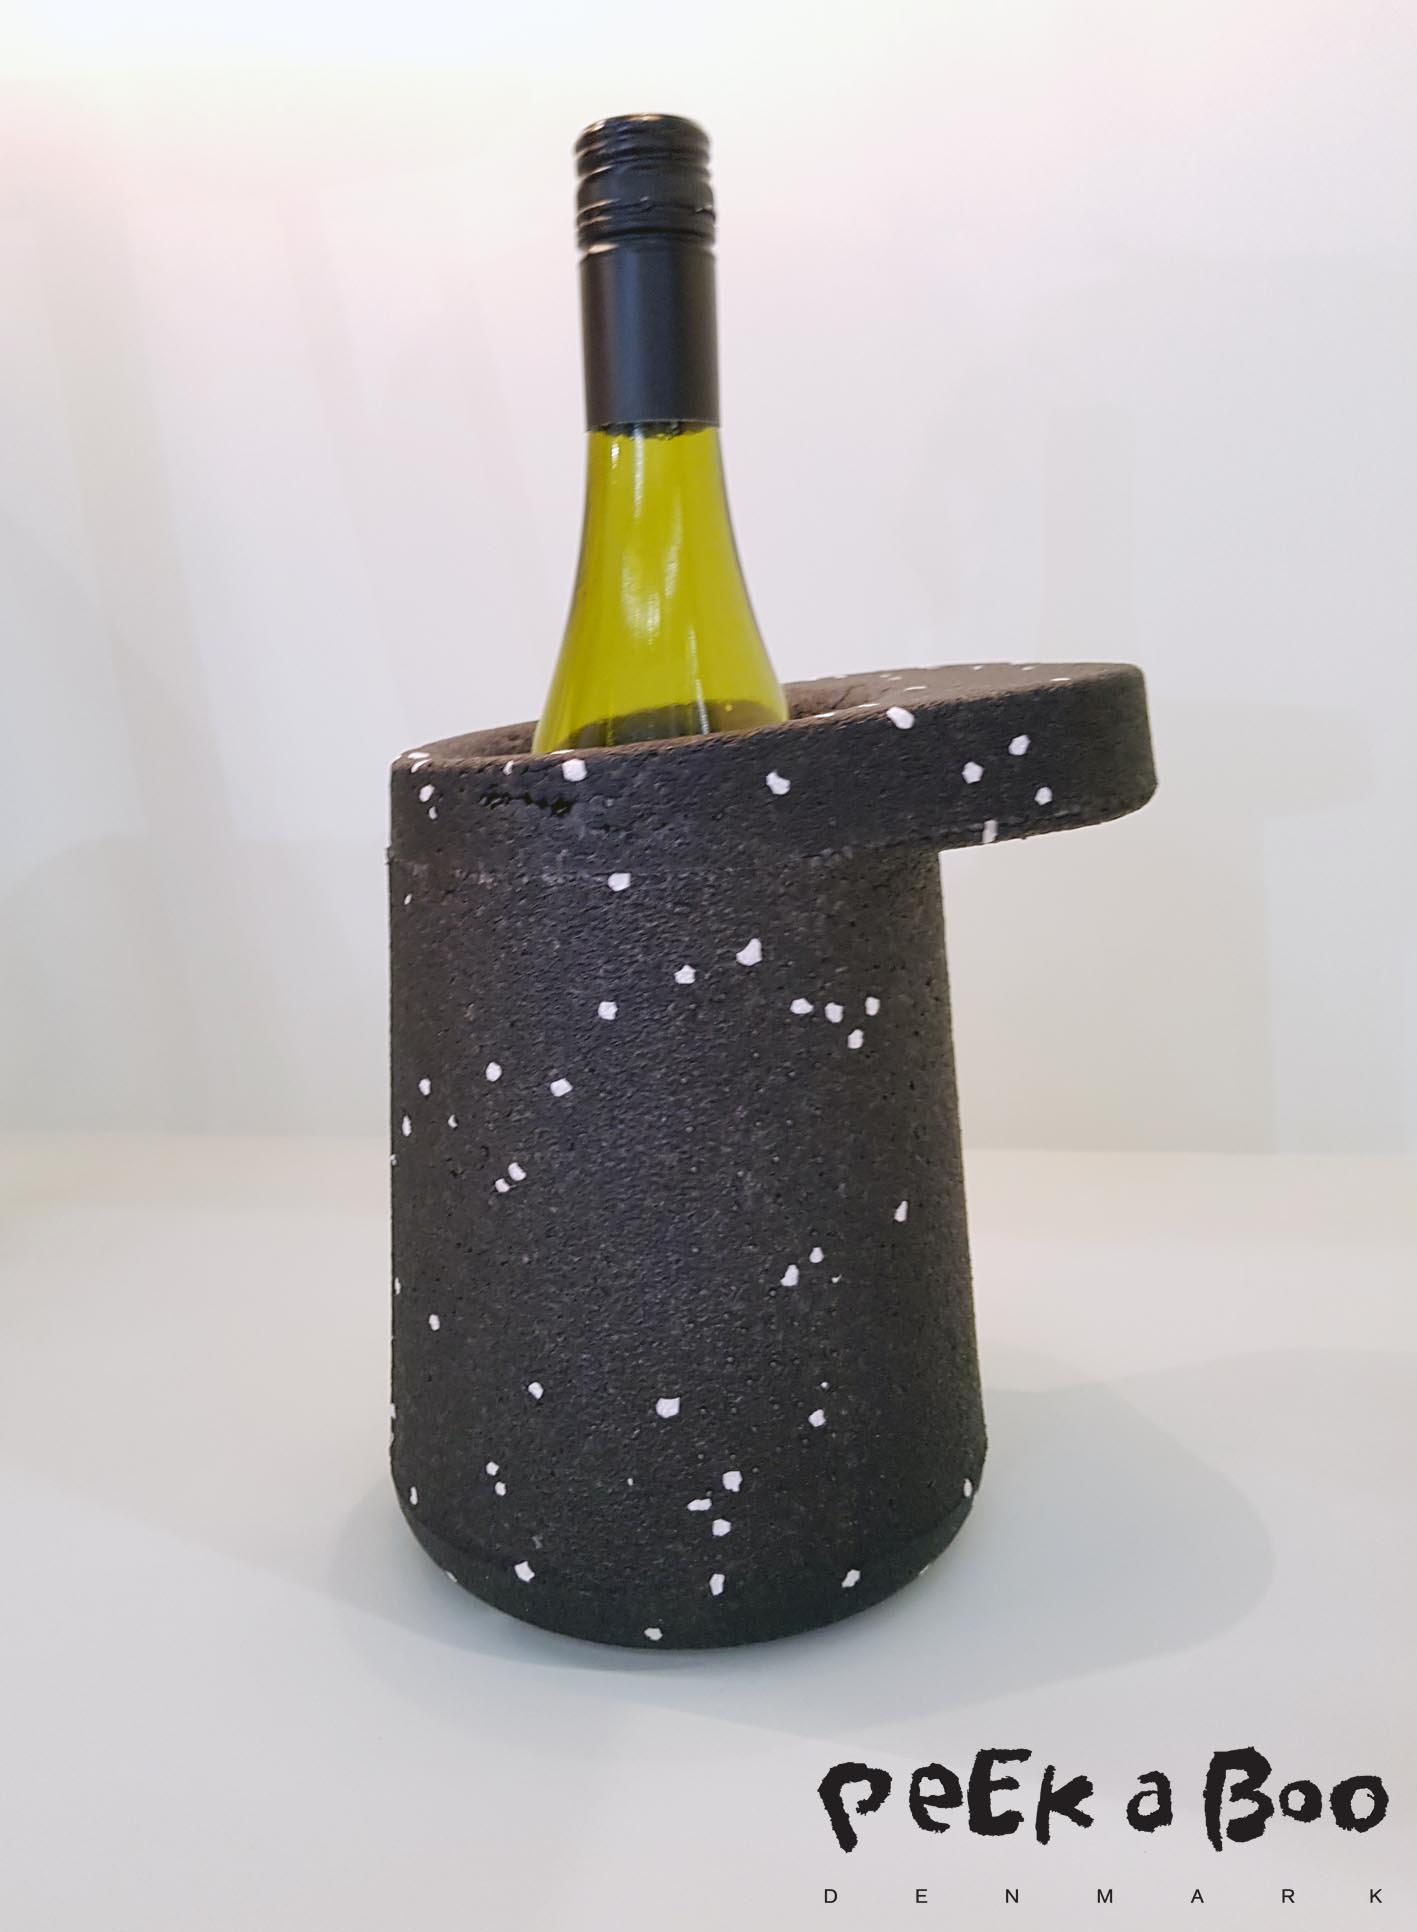 This winecooler is made of EPP. EPP is known for its strong isolating capacity, ready to keep your wine or champagne bottle cool! The cooler is deigned by Ernst Koning and sold through Puik art.